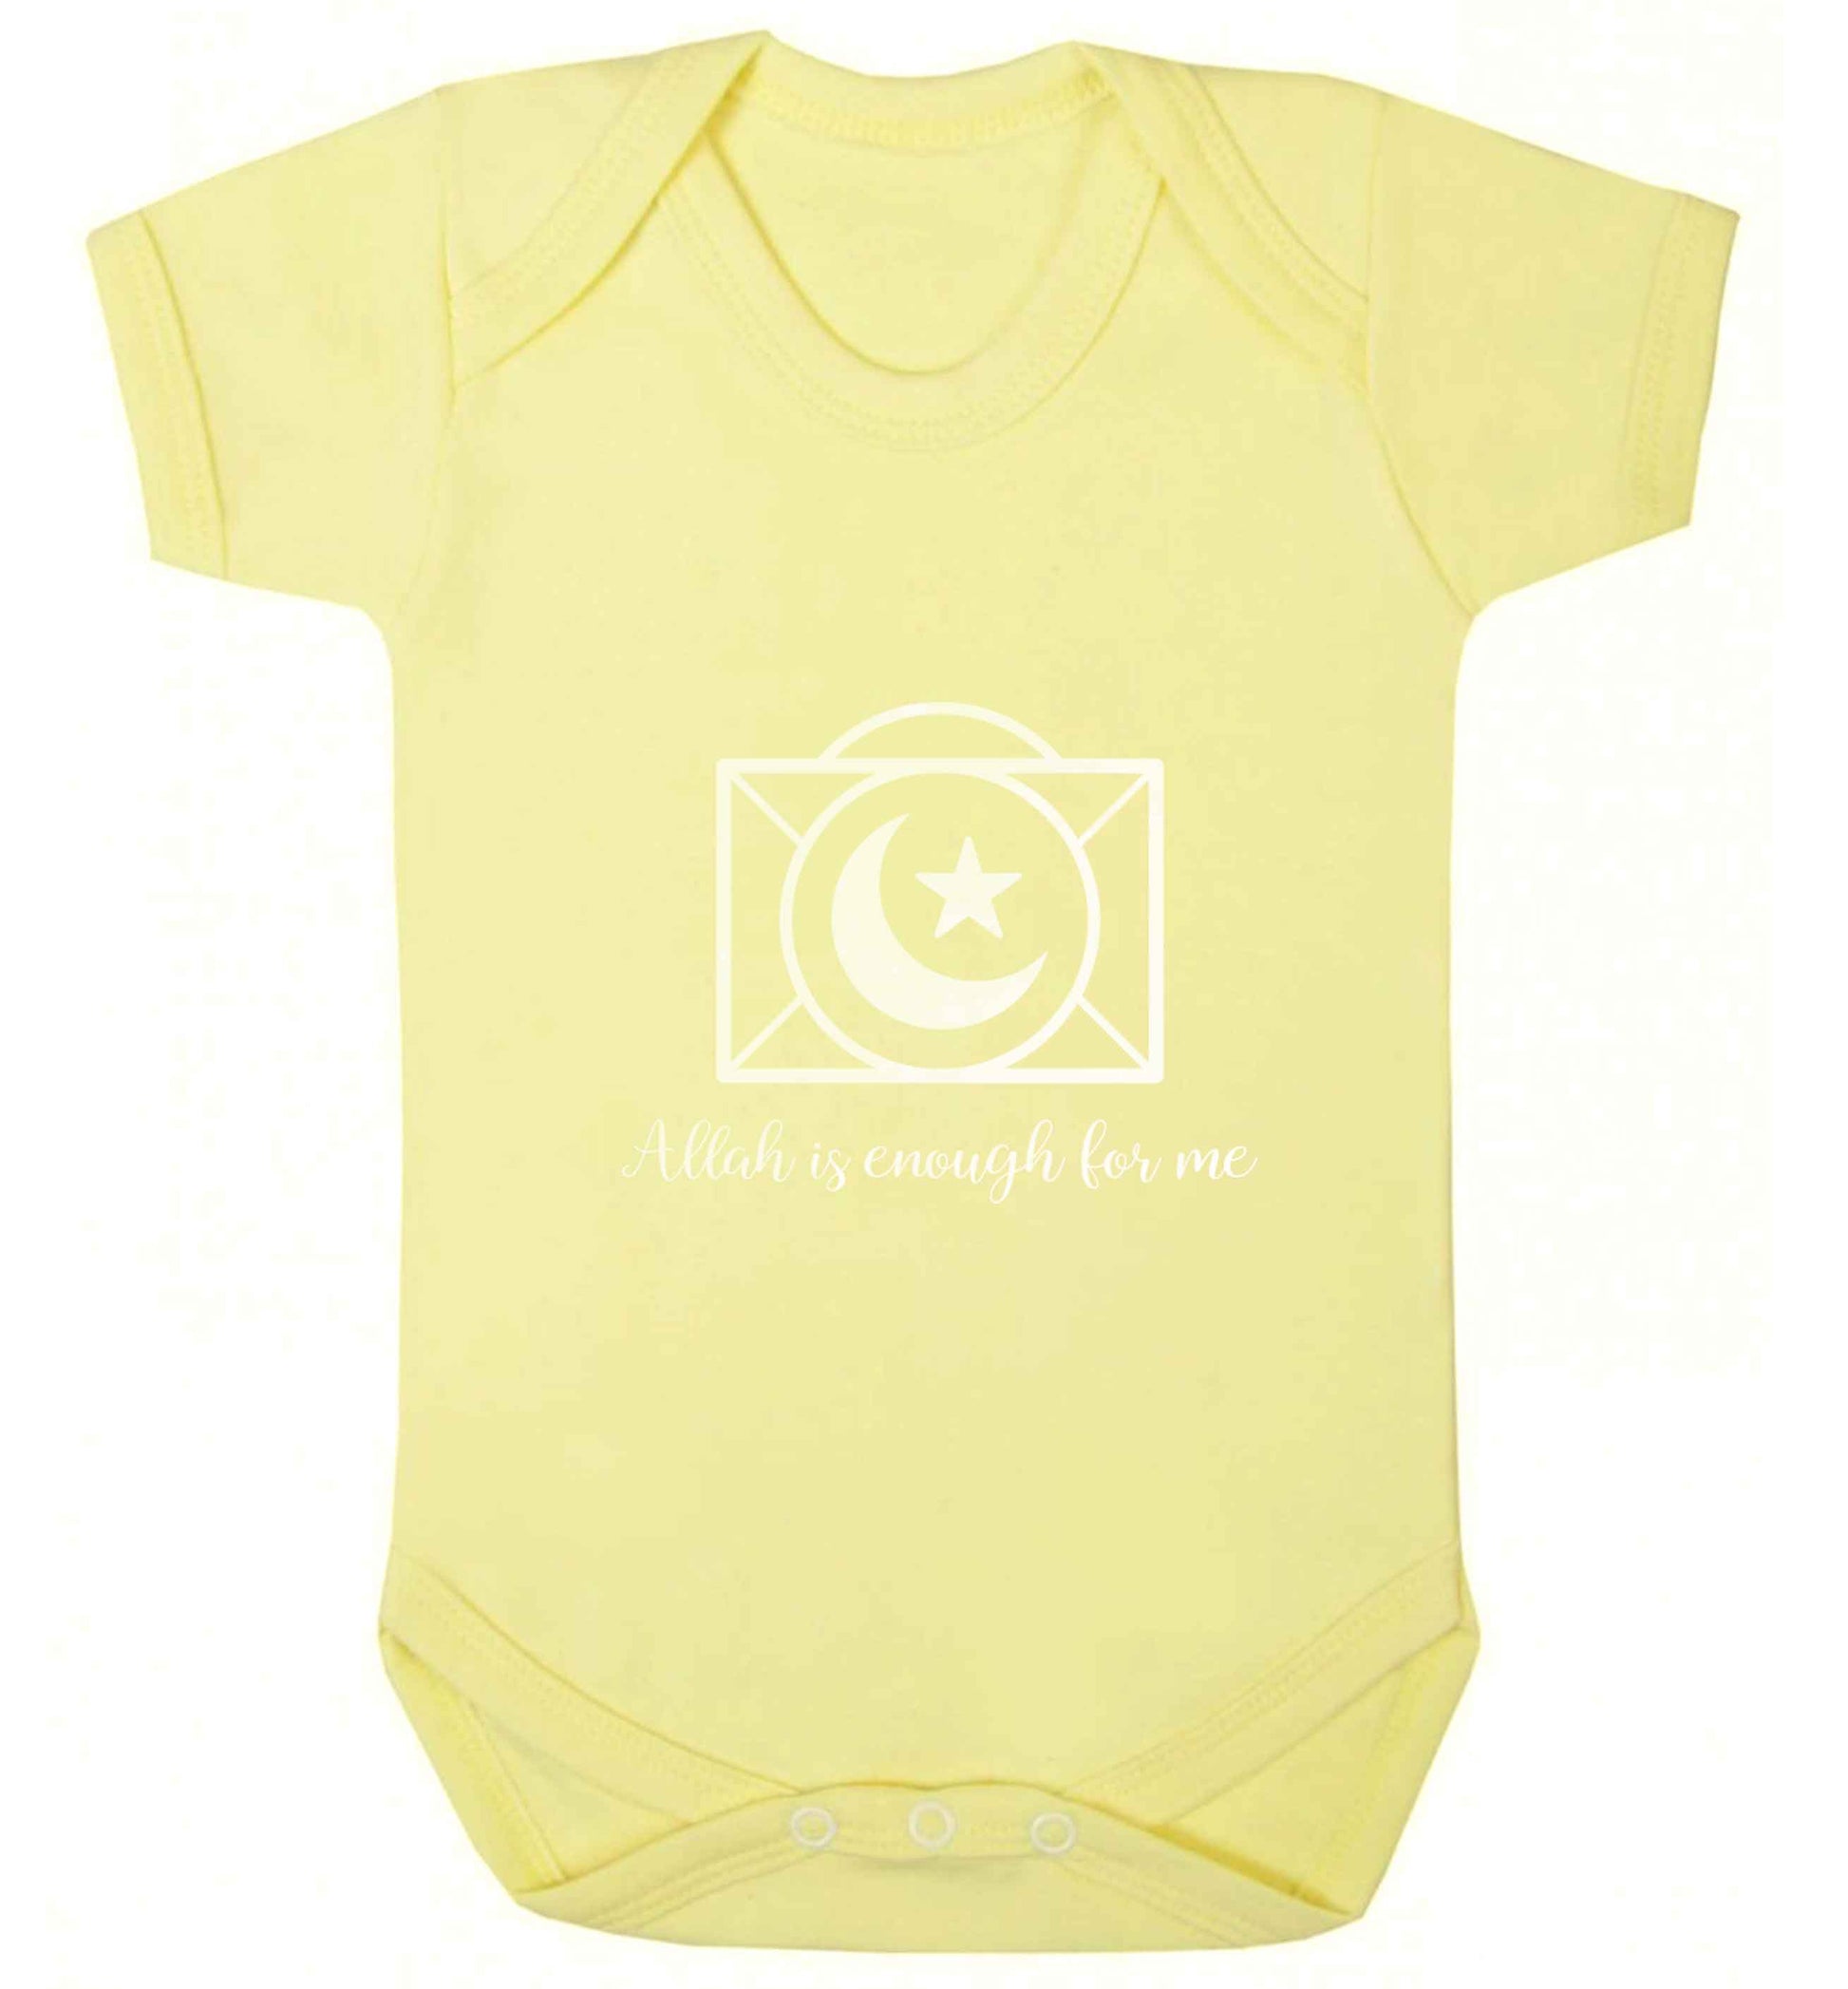 Allah is enough for me baby vest pale yellow 18-24 months